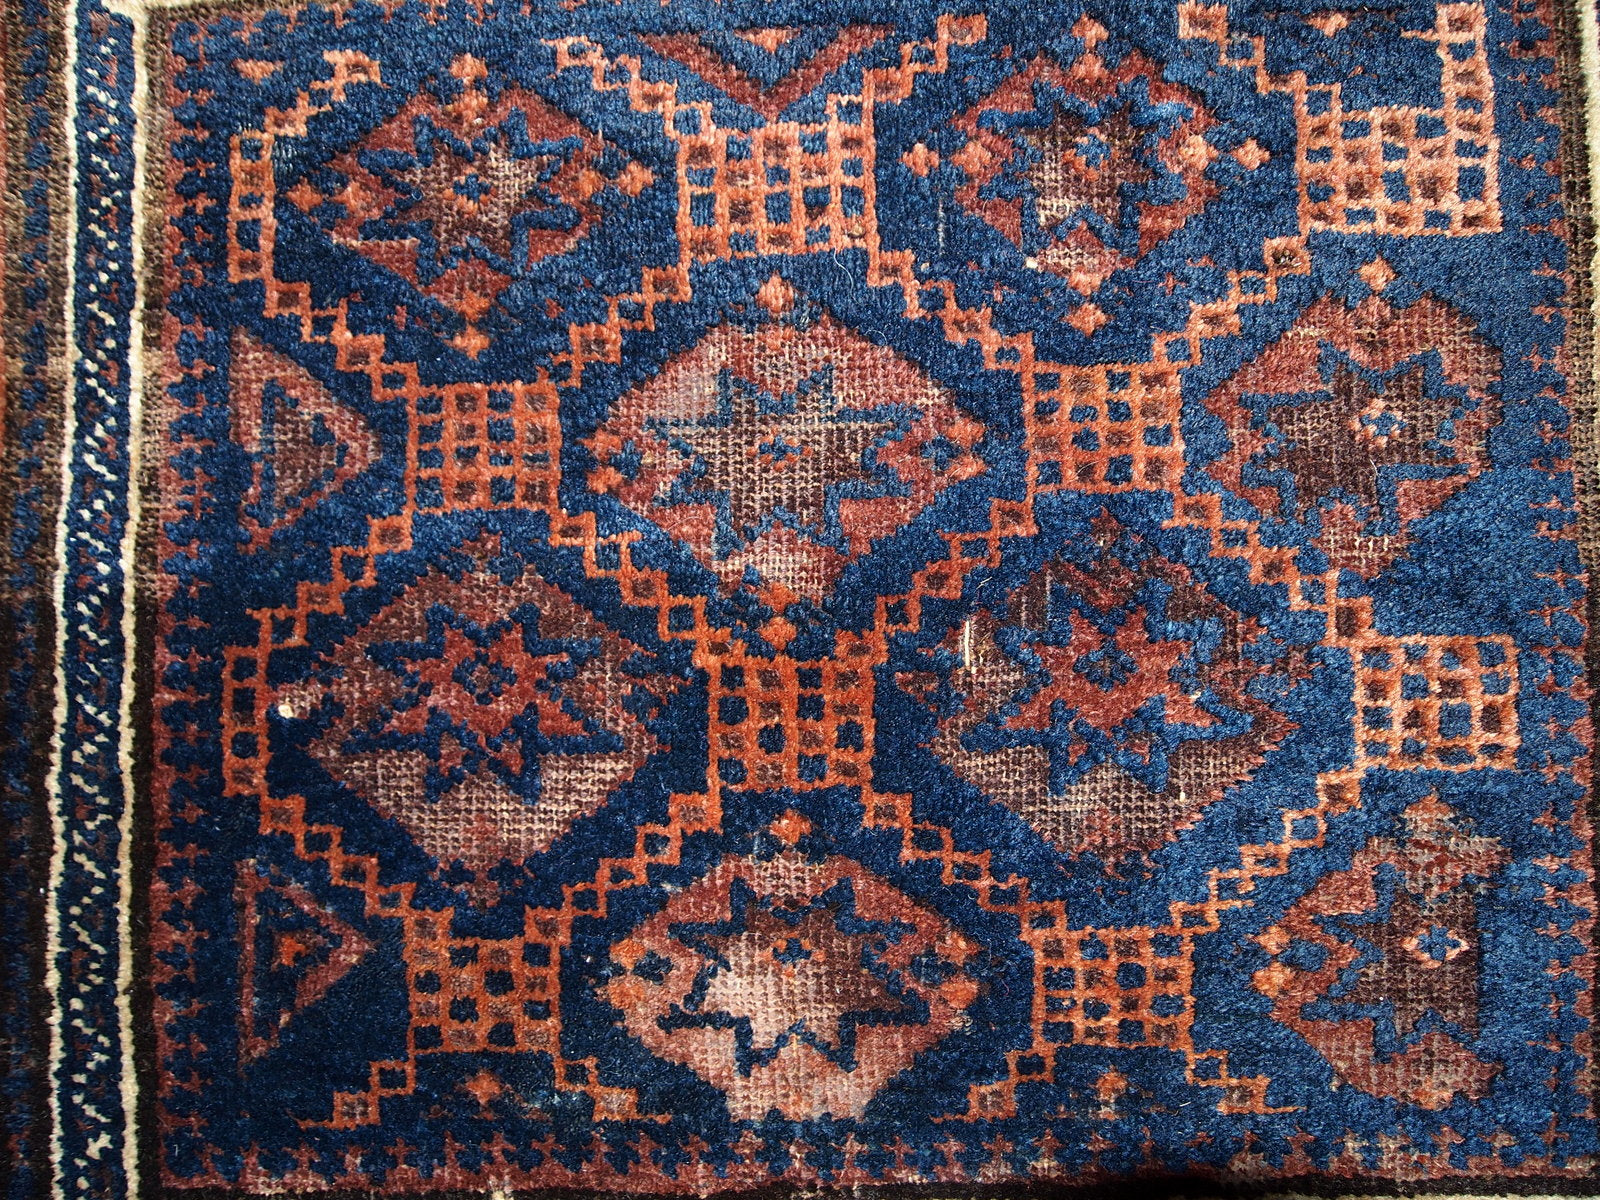 Antique hand made Afghan Baluch bag face in original condition with some wear due to age.